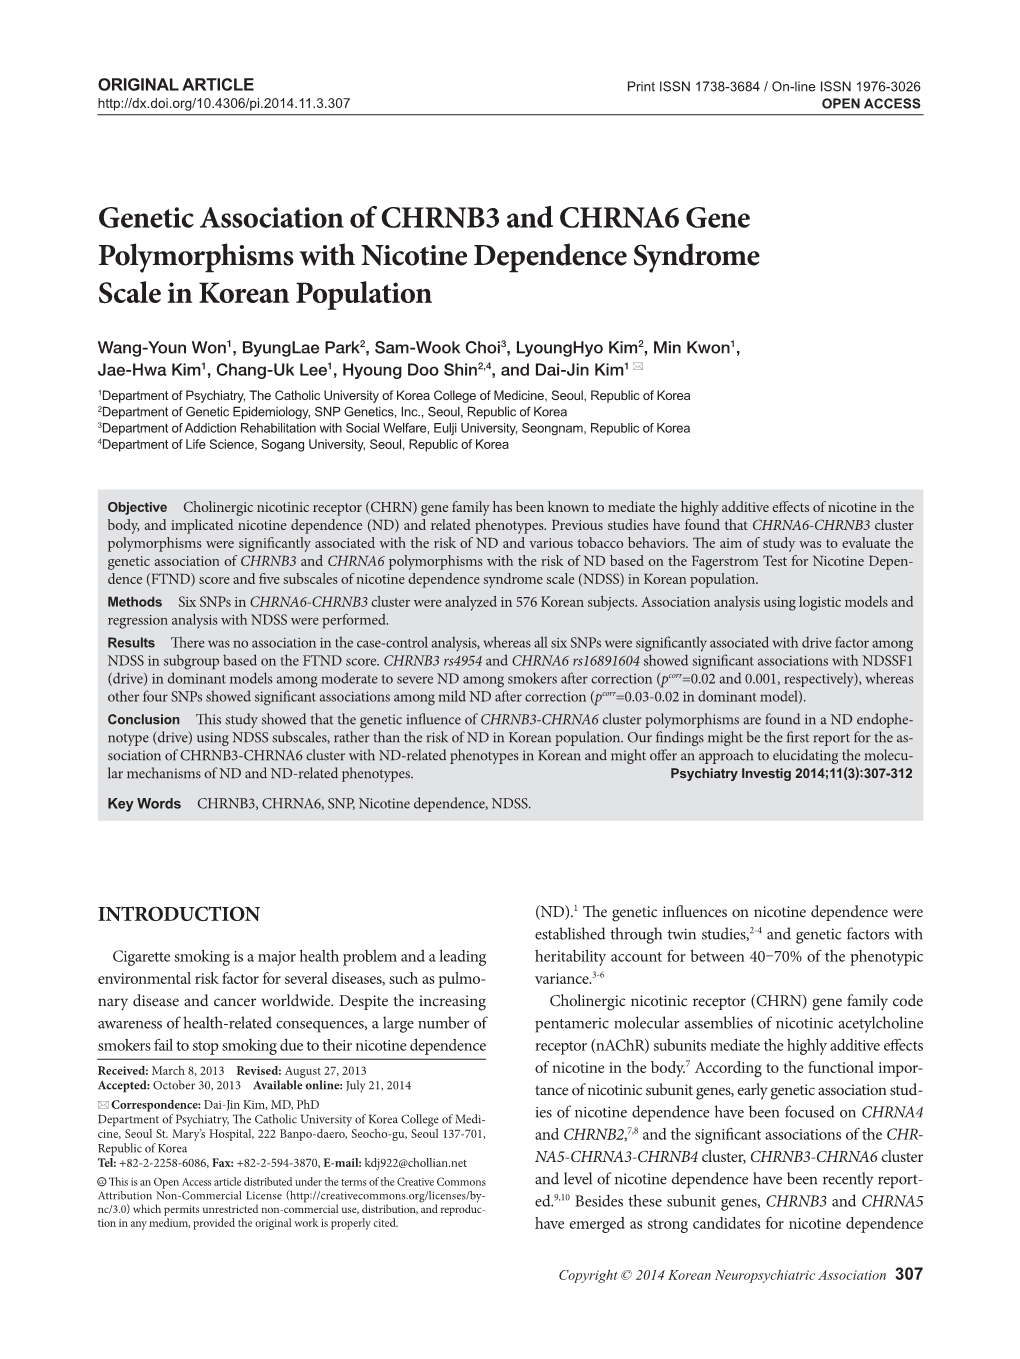 Genetic Association of CHRNB3 and CHRNA6 Gene Polymorphisms with Nicotine Dependence Syndrome Scale in Korean Population